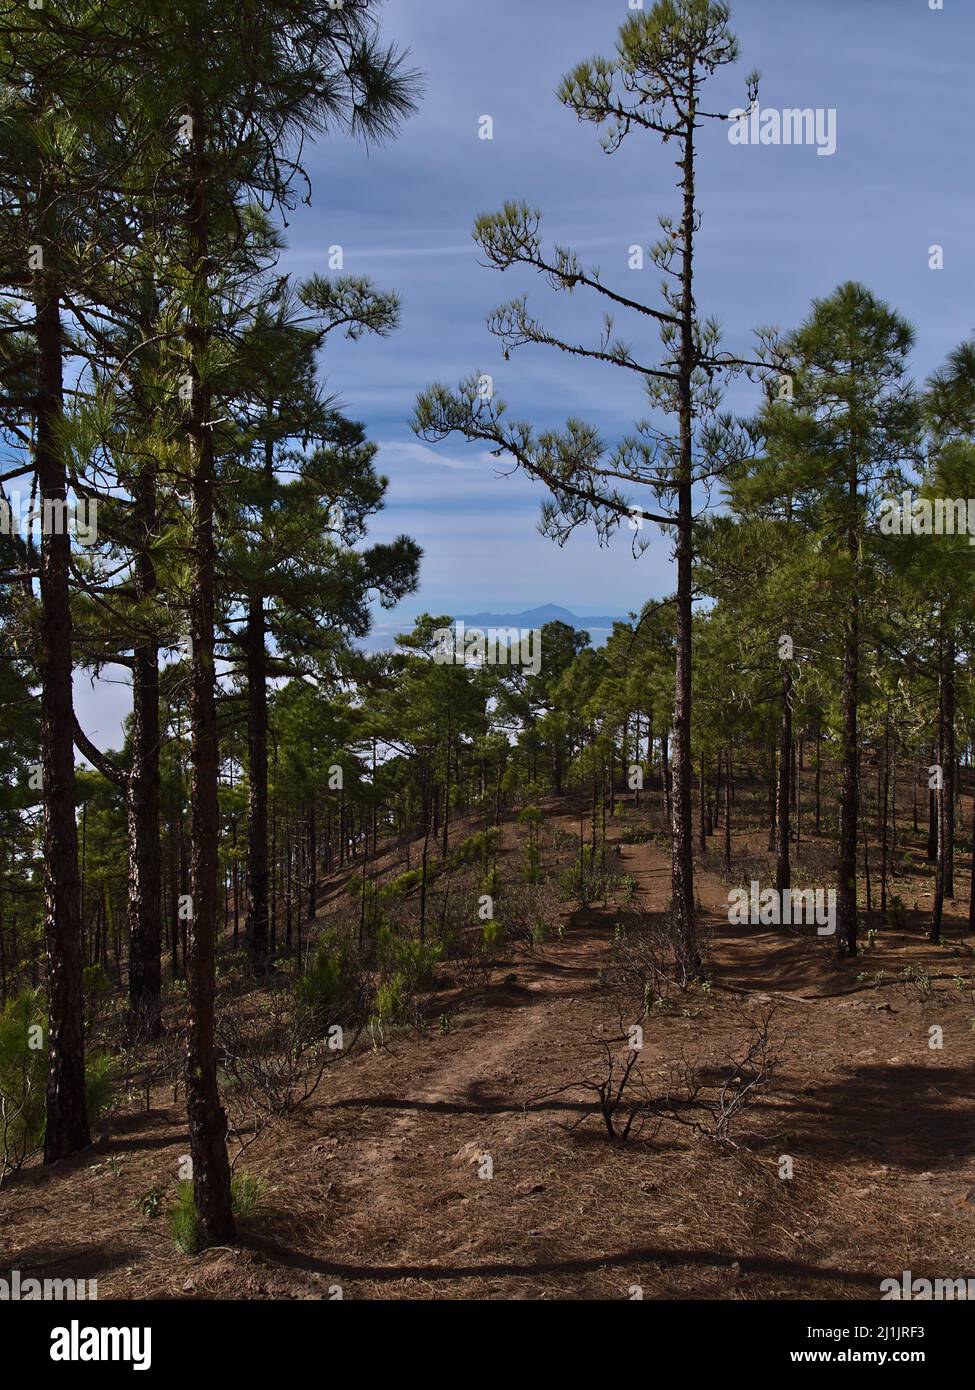 View of hiking trail leading through forest of Canary Island pine trees (Pinus canariensis) in Tamadaba Natural Park in the mountains of Gran Canaria. Stock Photo